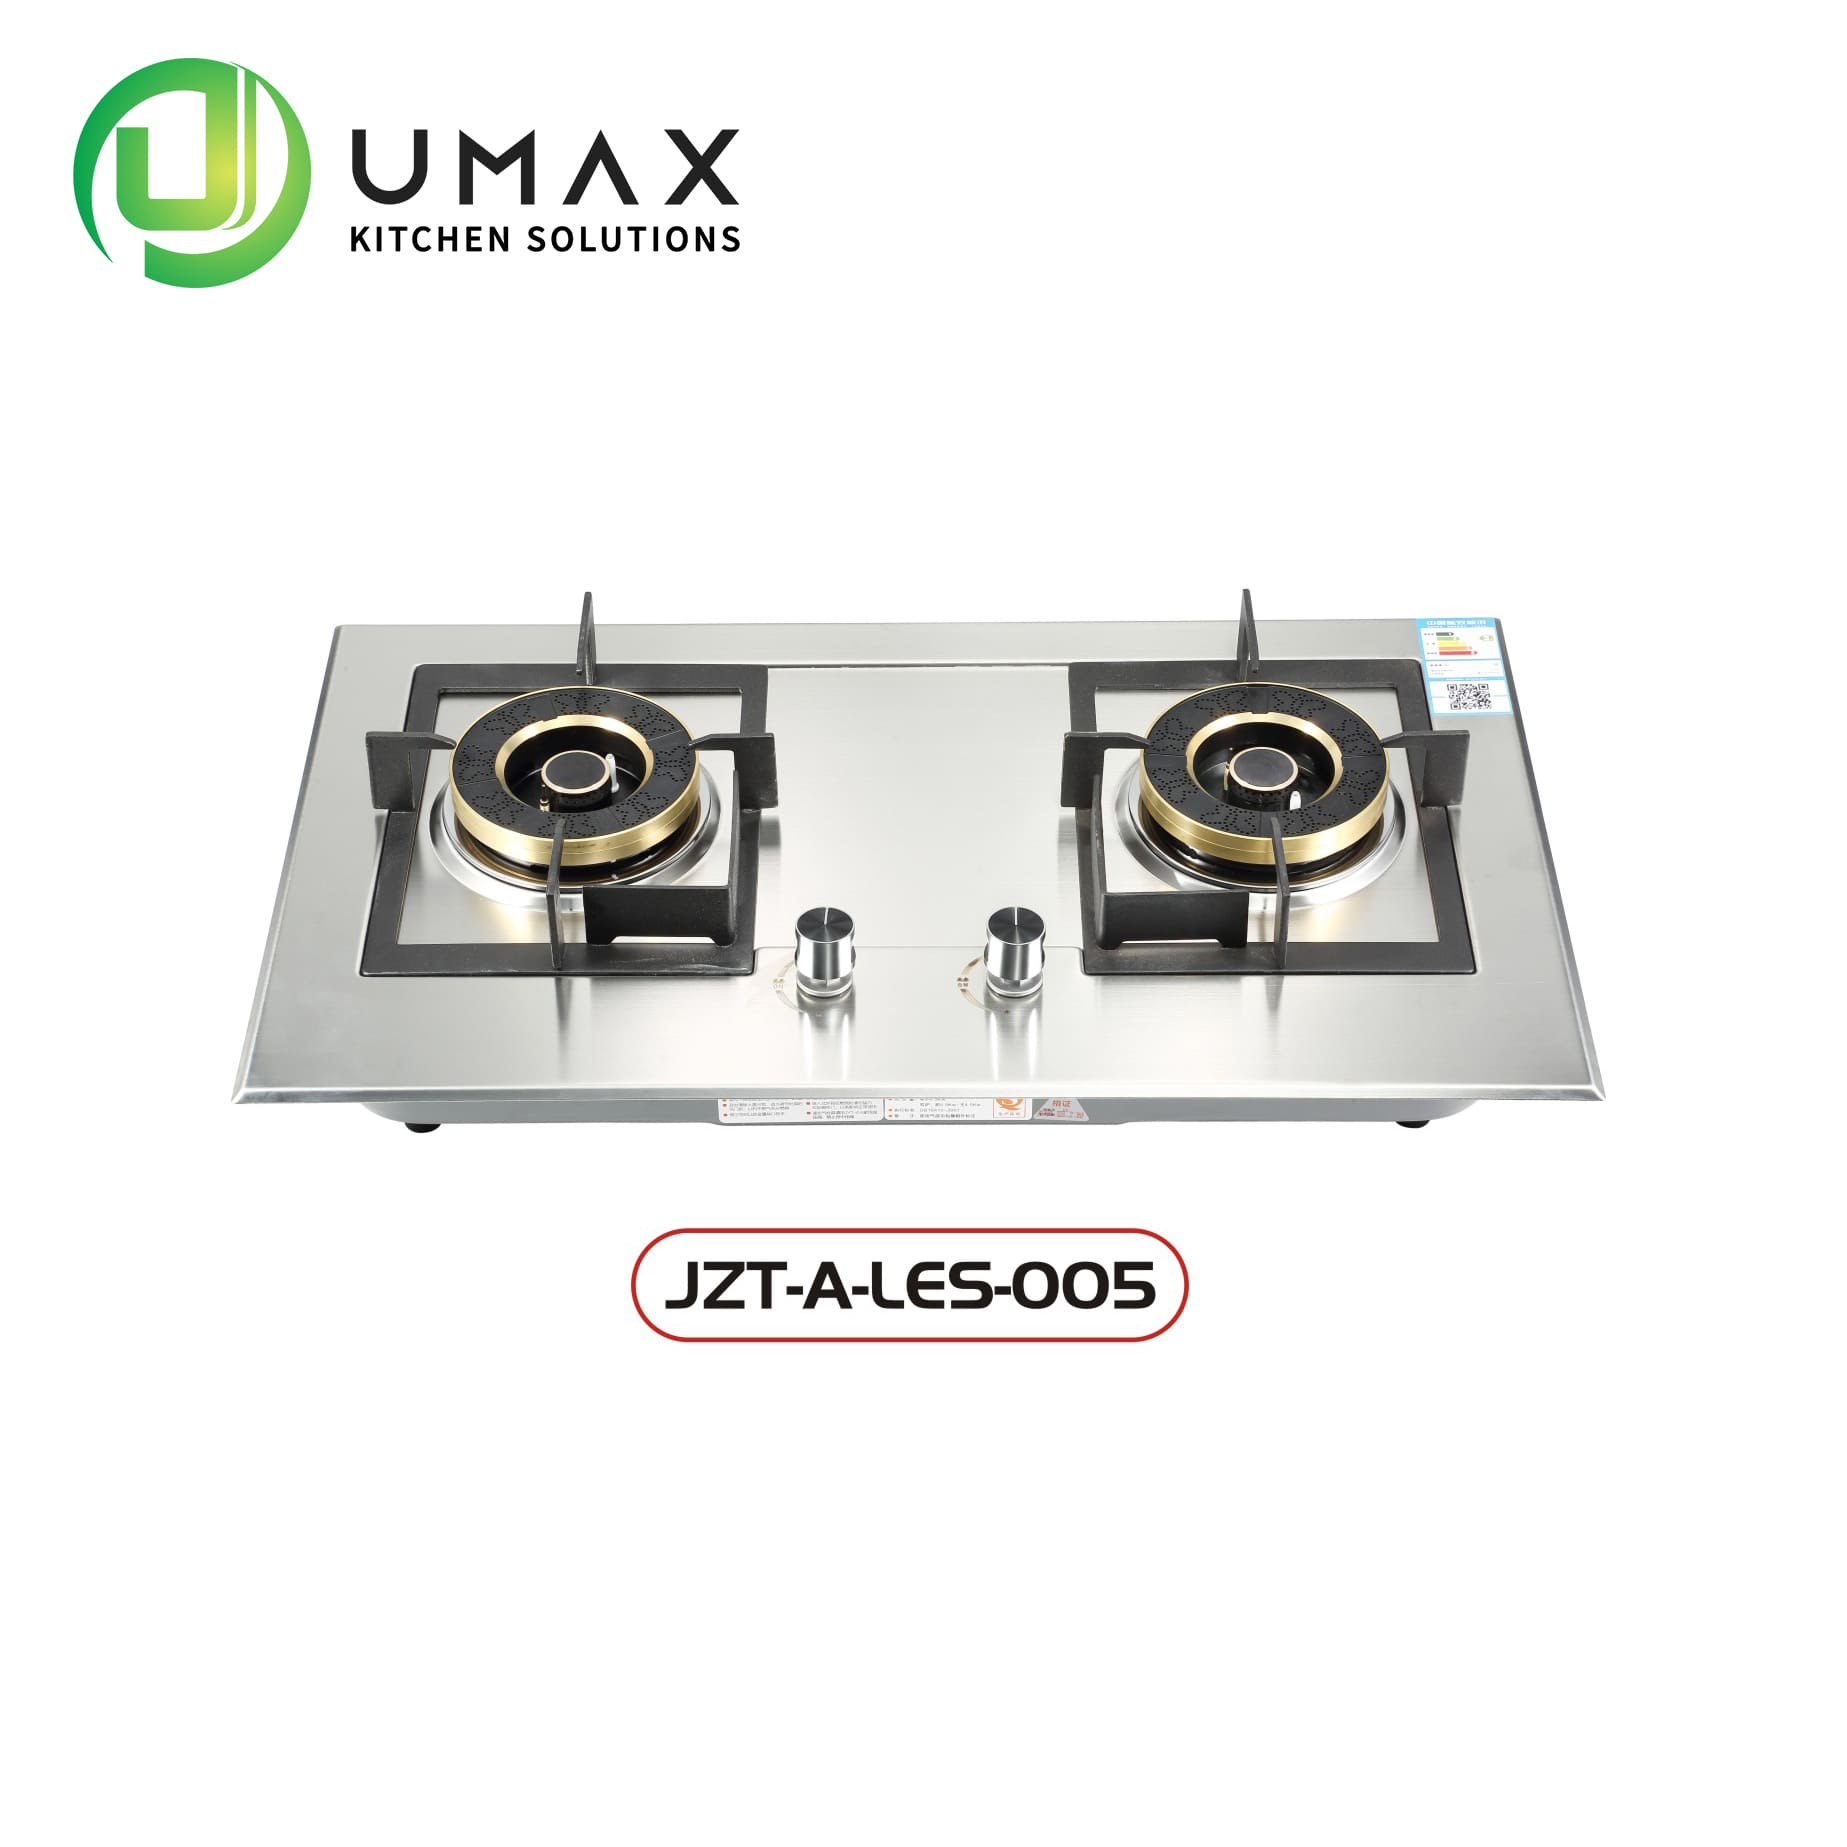 Wholesale Gas Stoves From China's Leading Manufacturer